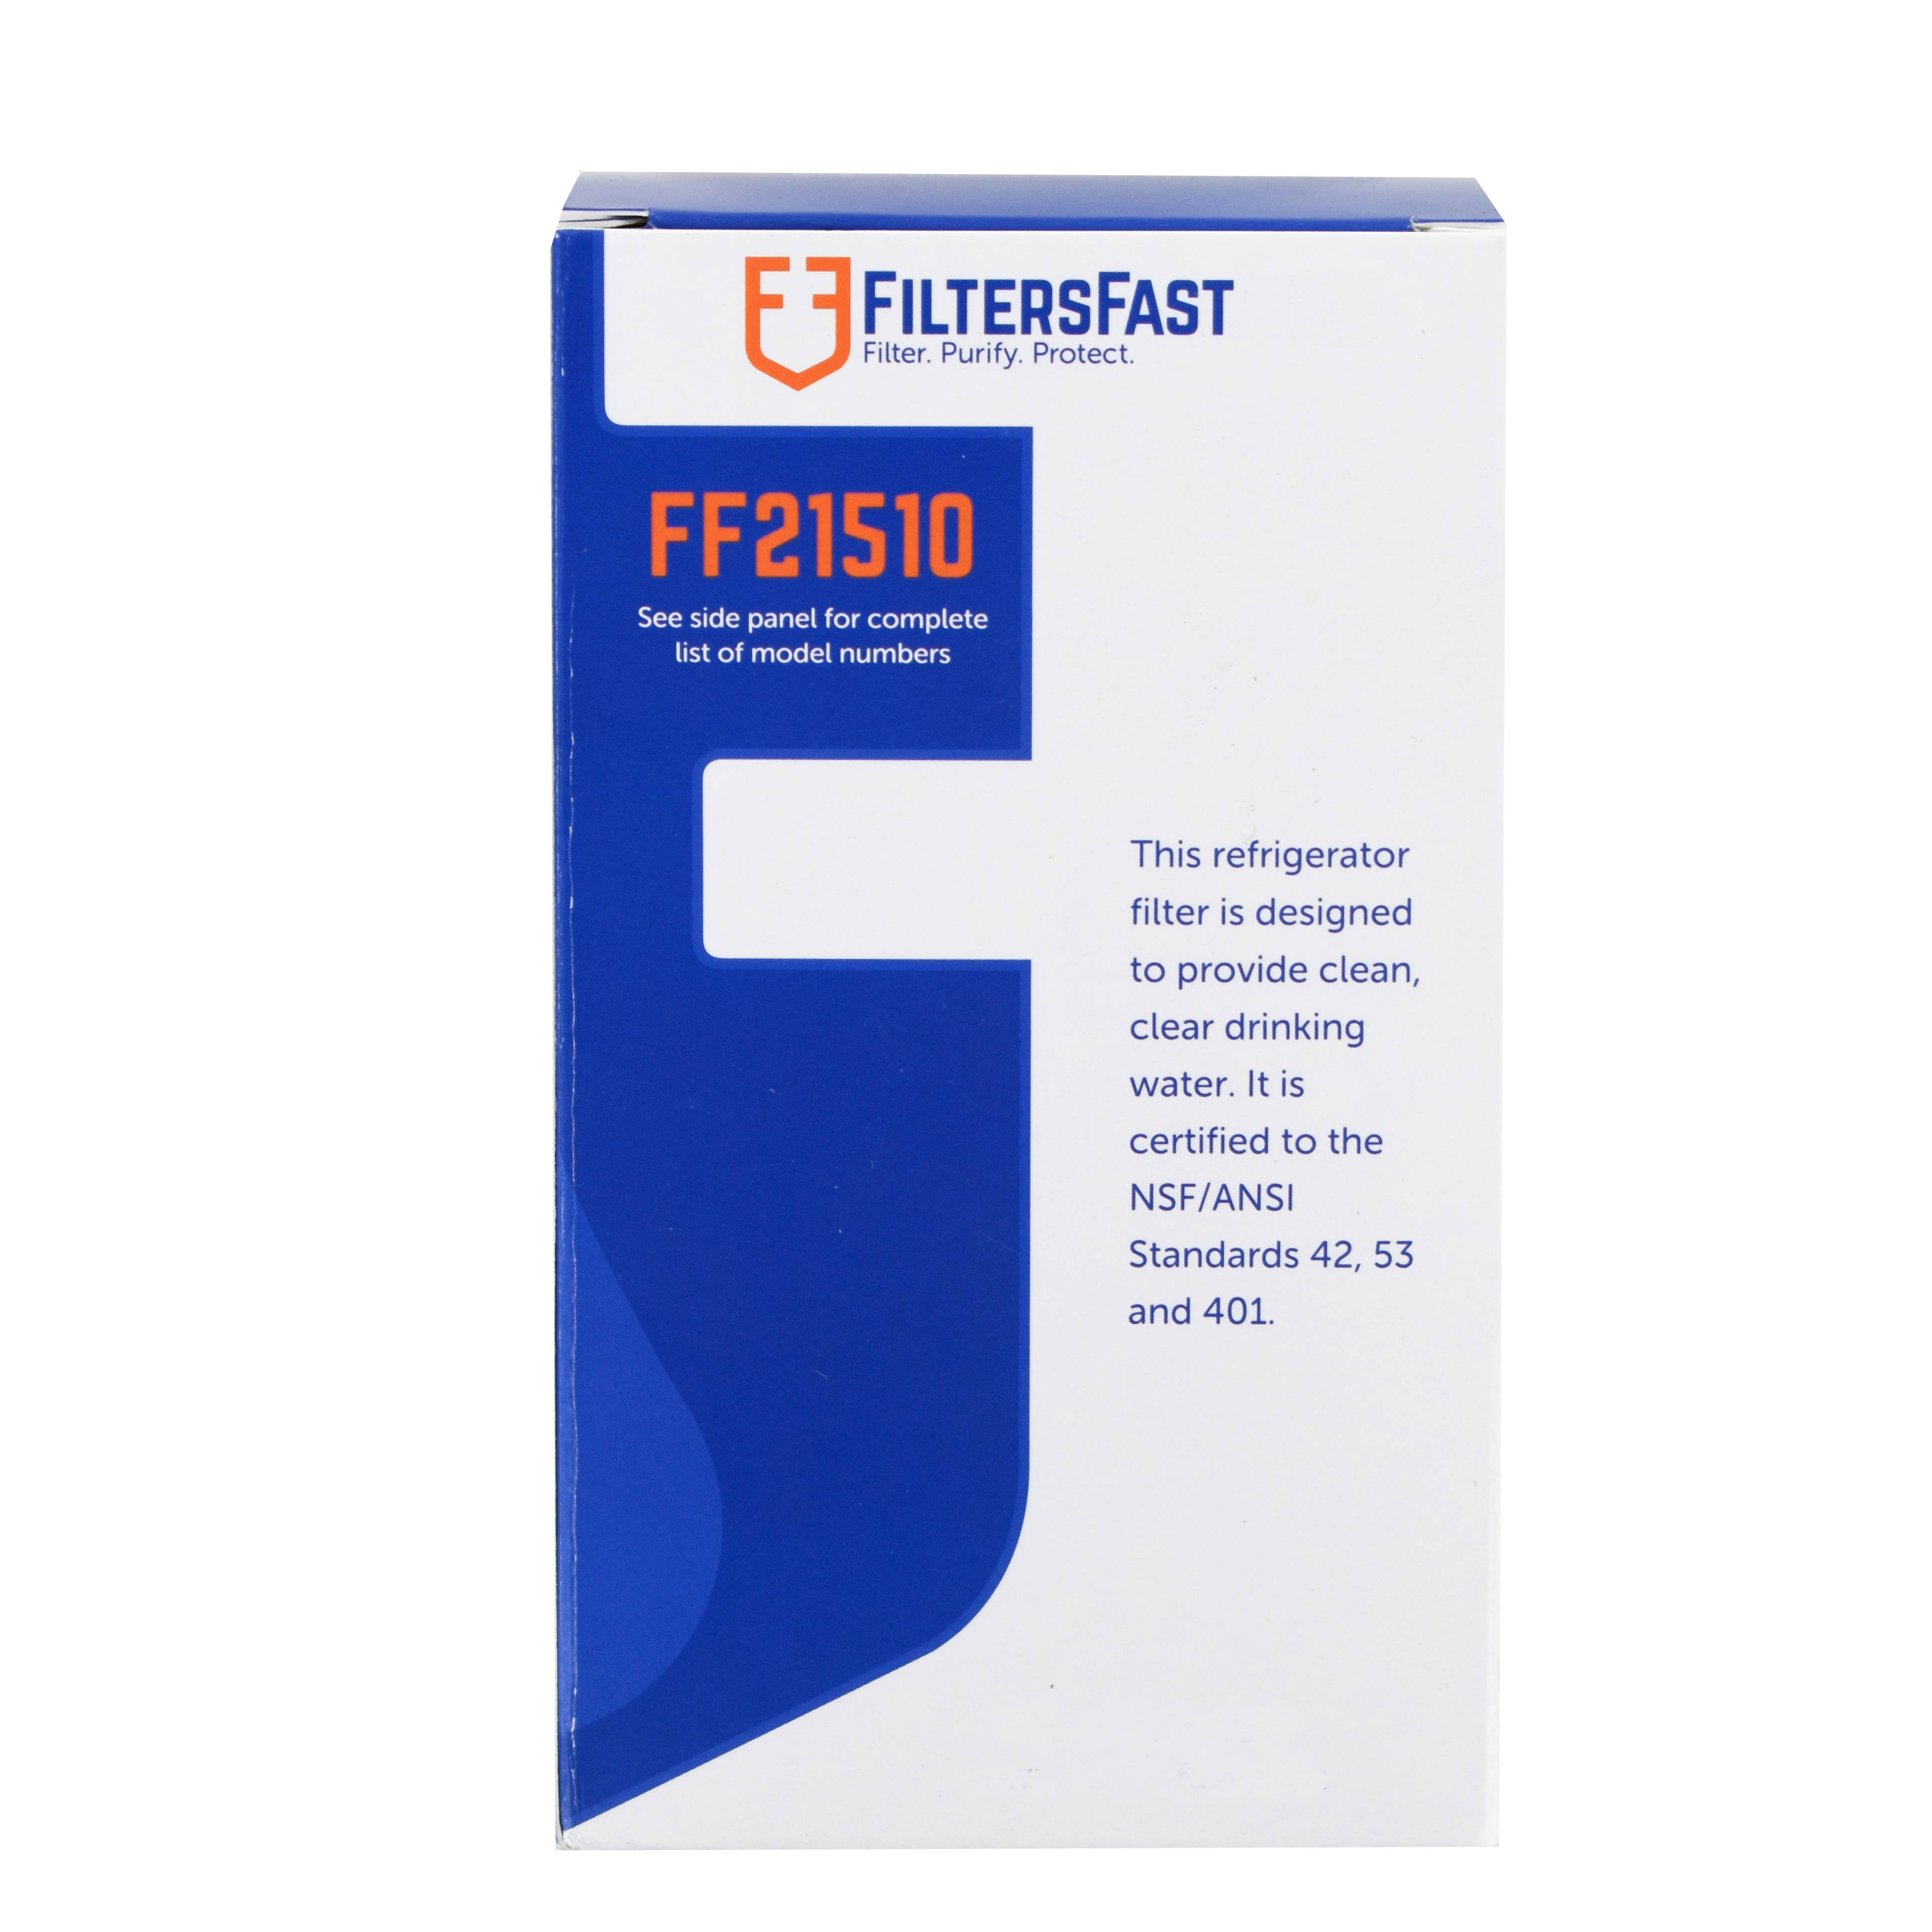 Filters Fast&reg; FF21510 Replacement for Maytag UKF7003